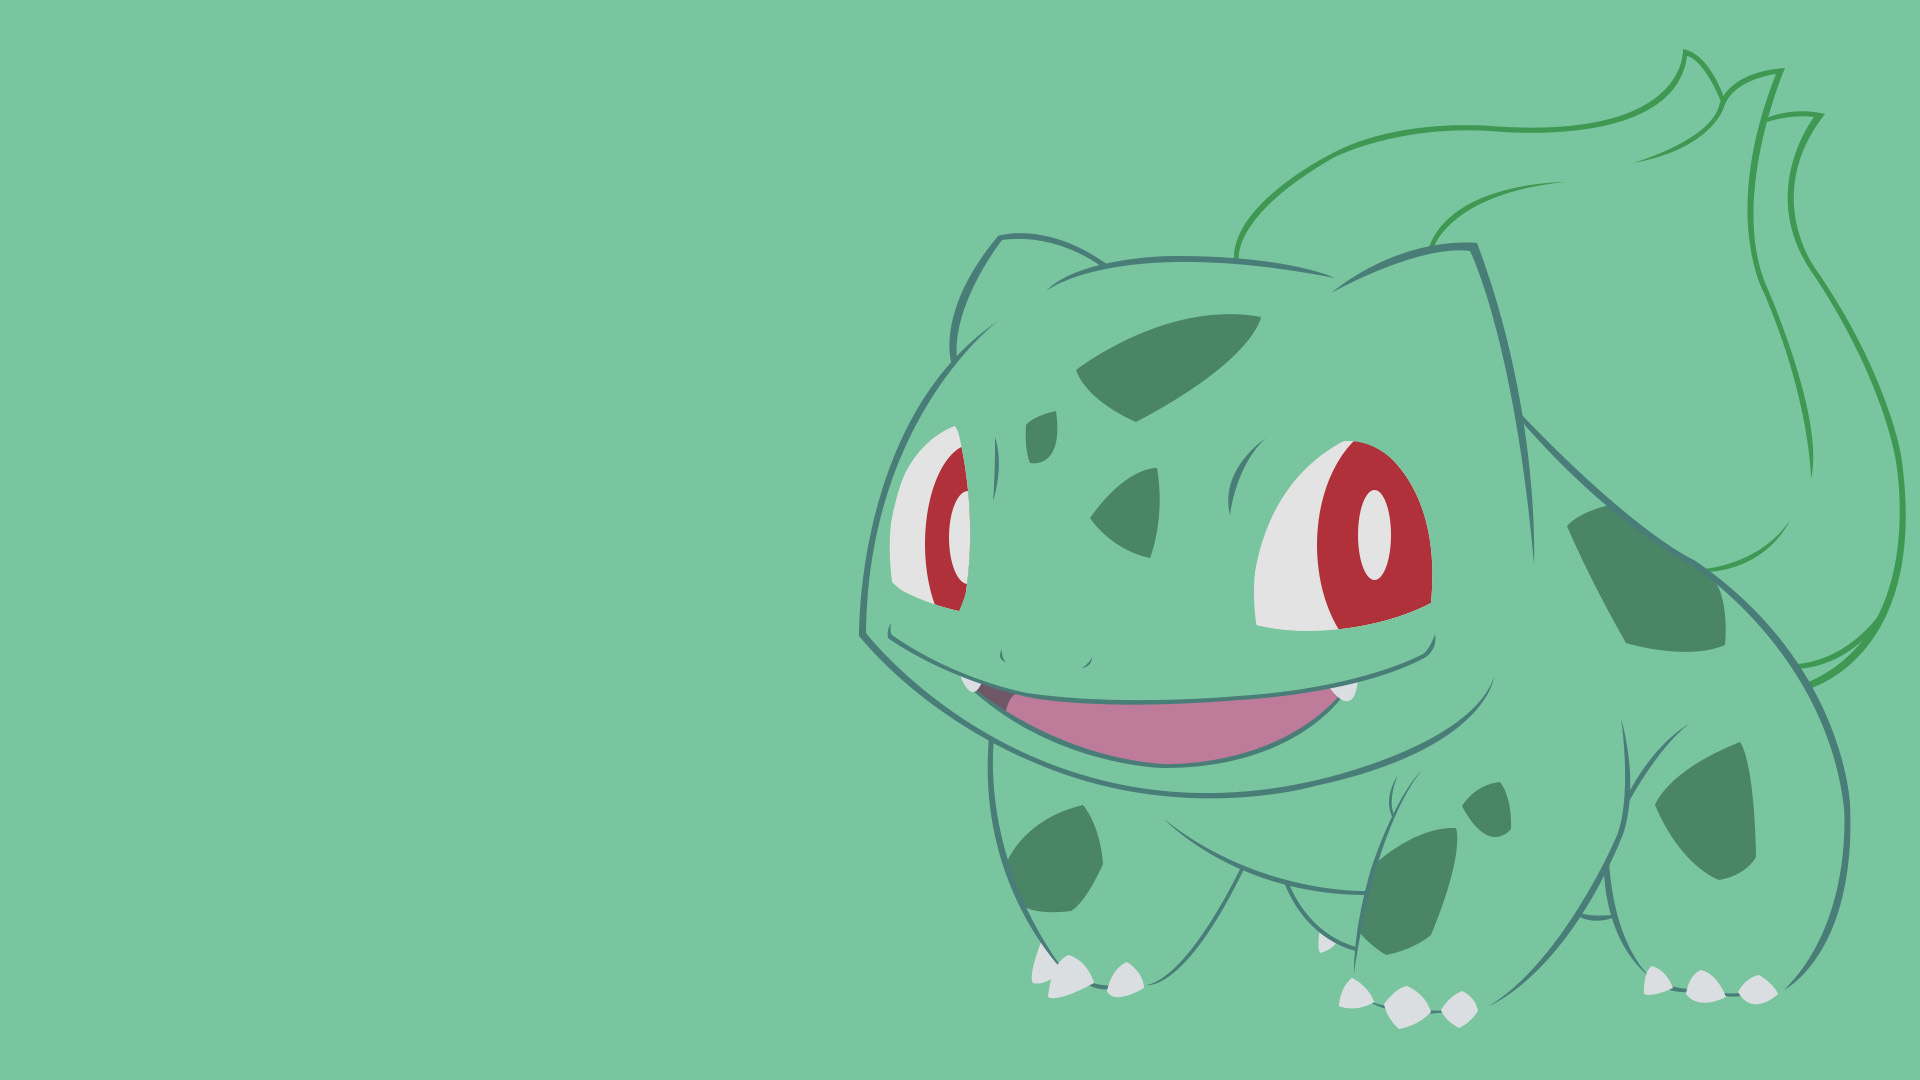 Grass (Pokemon): Bulbasaur, A Poison type, Introduced in Generation 1, The bulb on its back stores an energy. 1920x1080 Full HD Wallpaper.